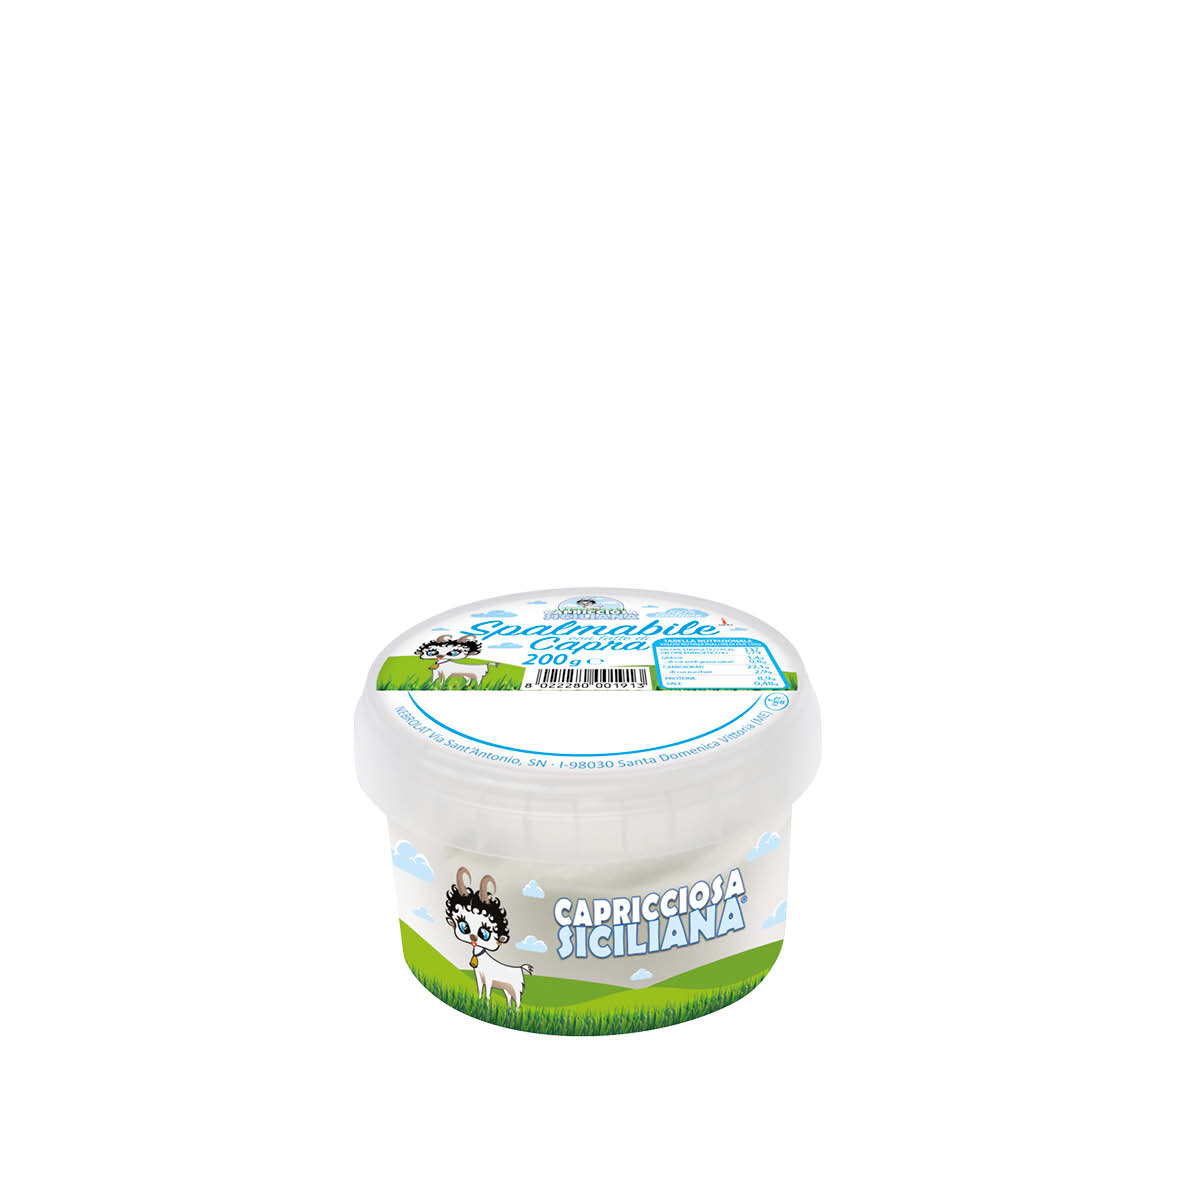 Goat cheese spread gr 200